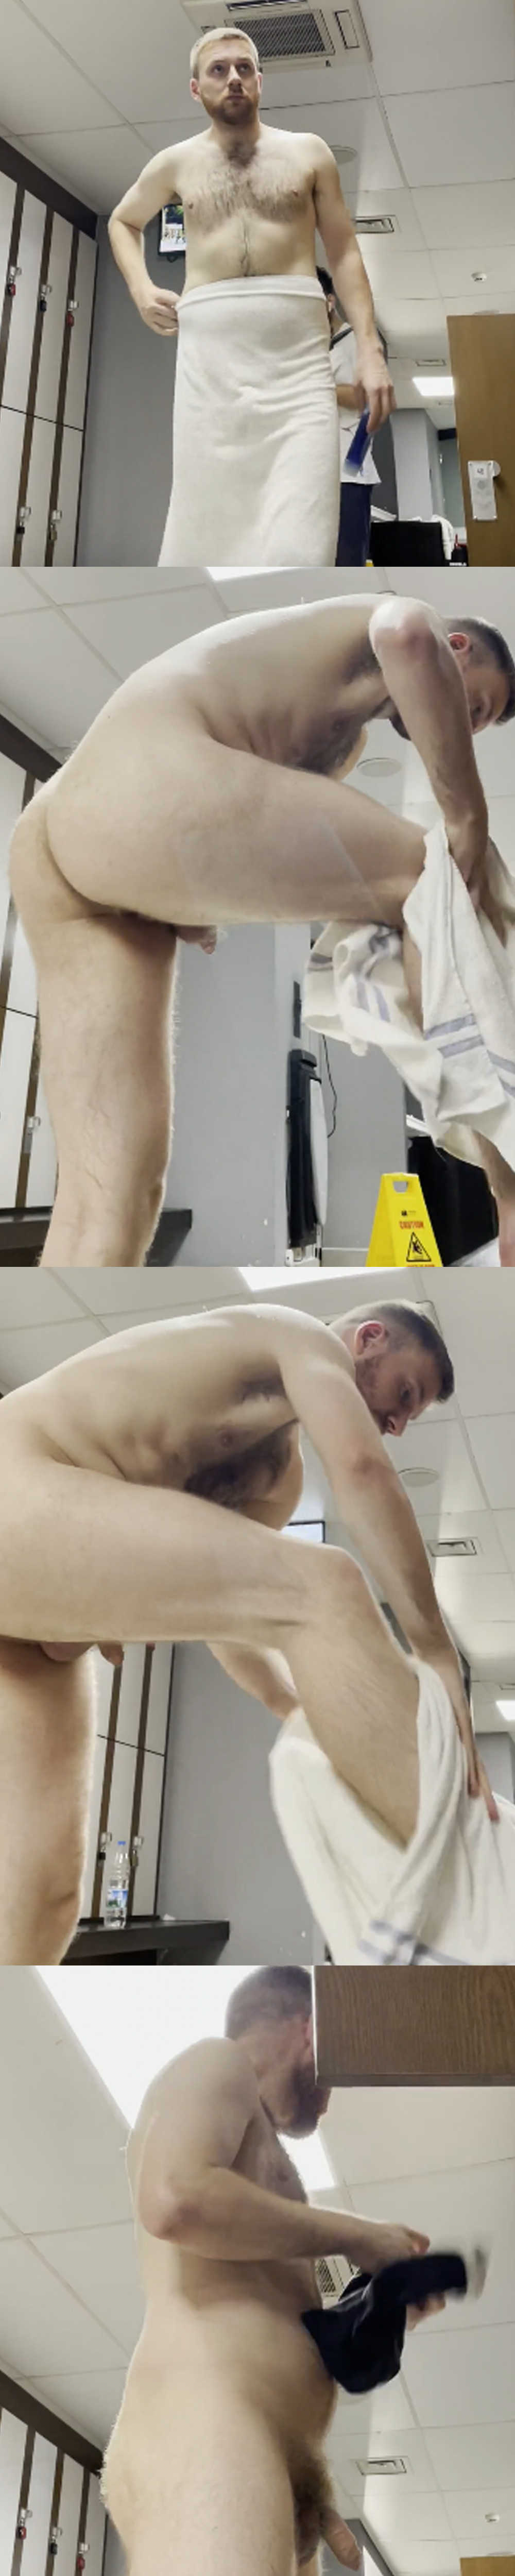 man with hairy uncut dick caught drying off in gym locker room